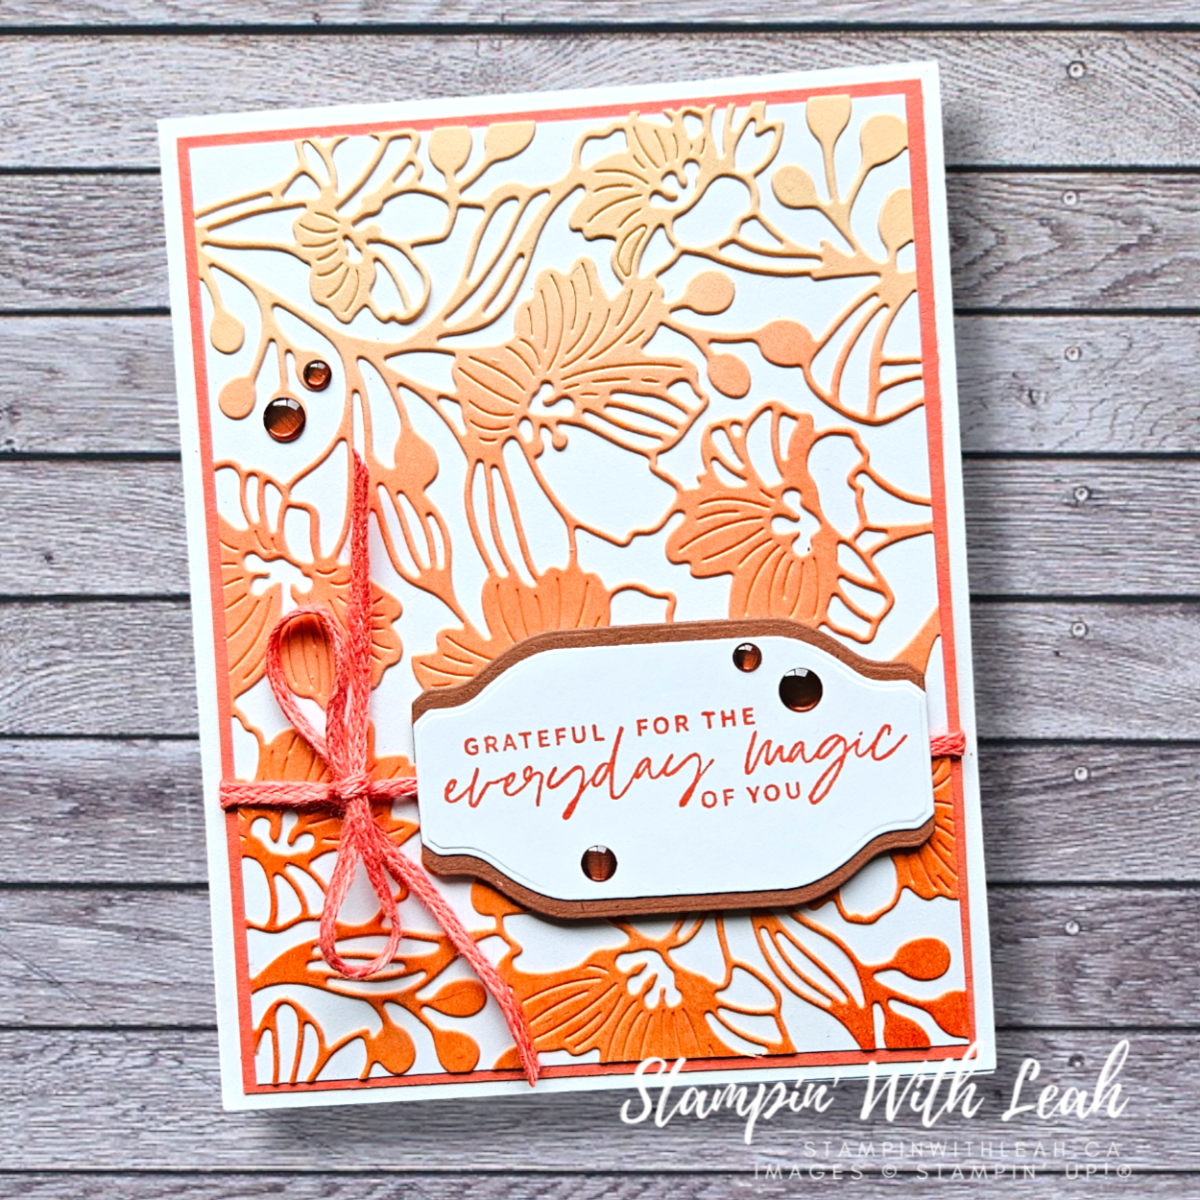 Gorgeous Garden and other AWESOME last chance/clearance rack items by Stampin’ Up!